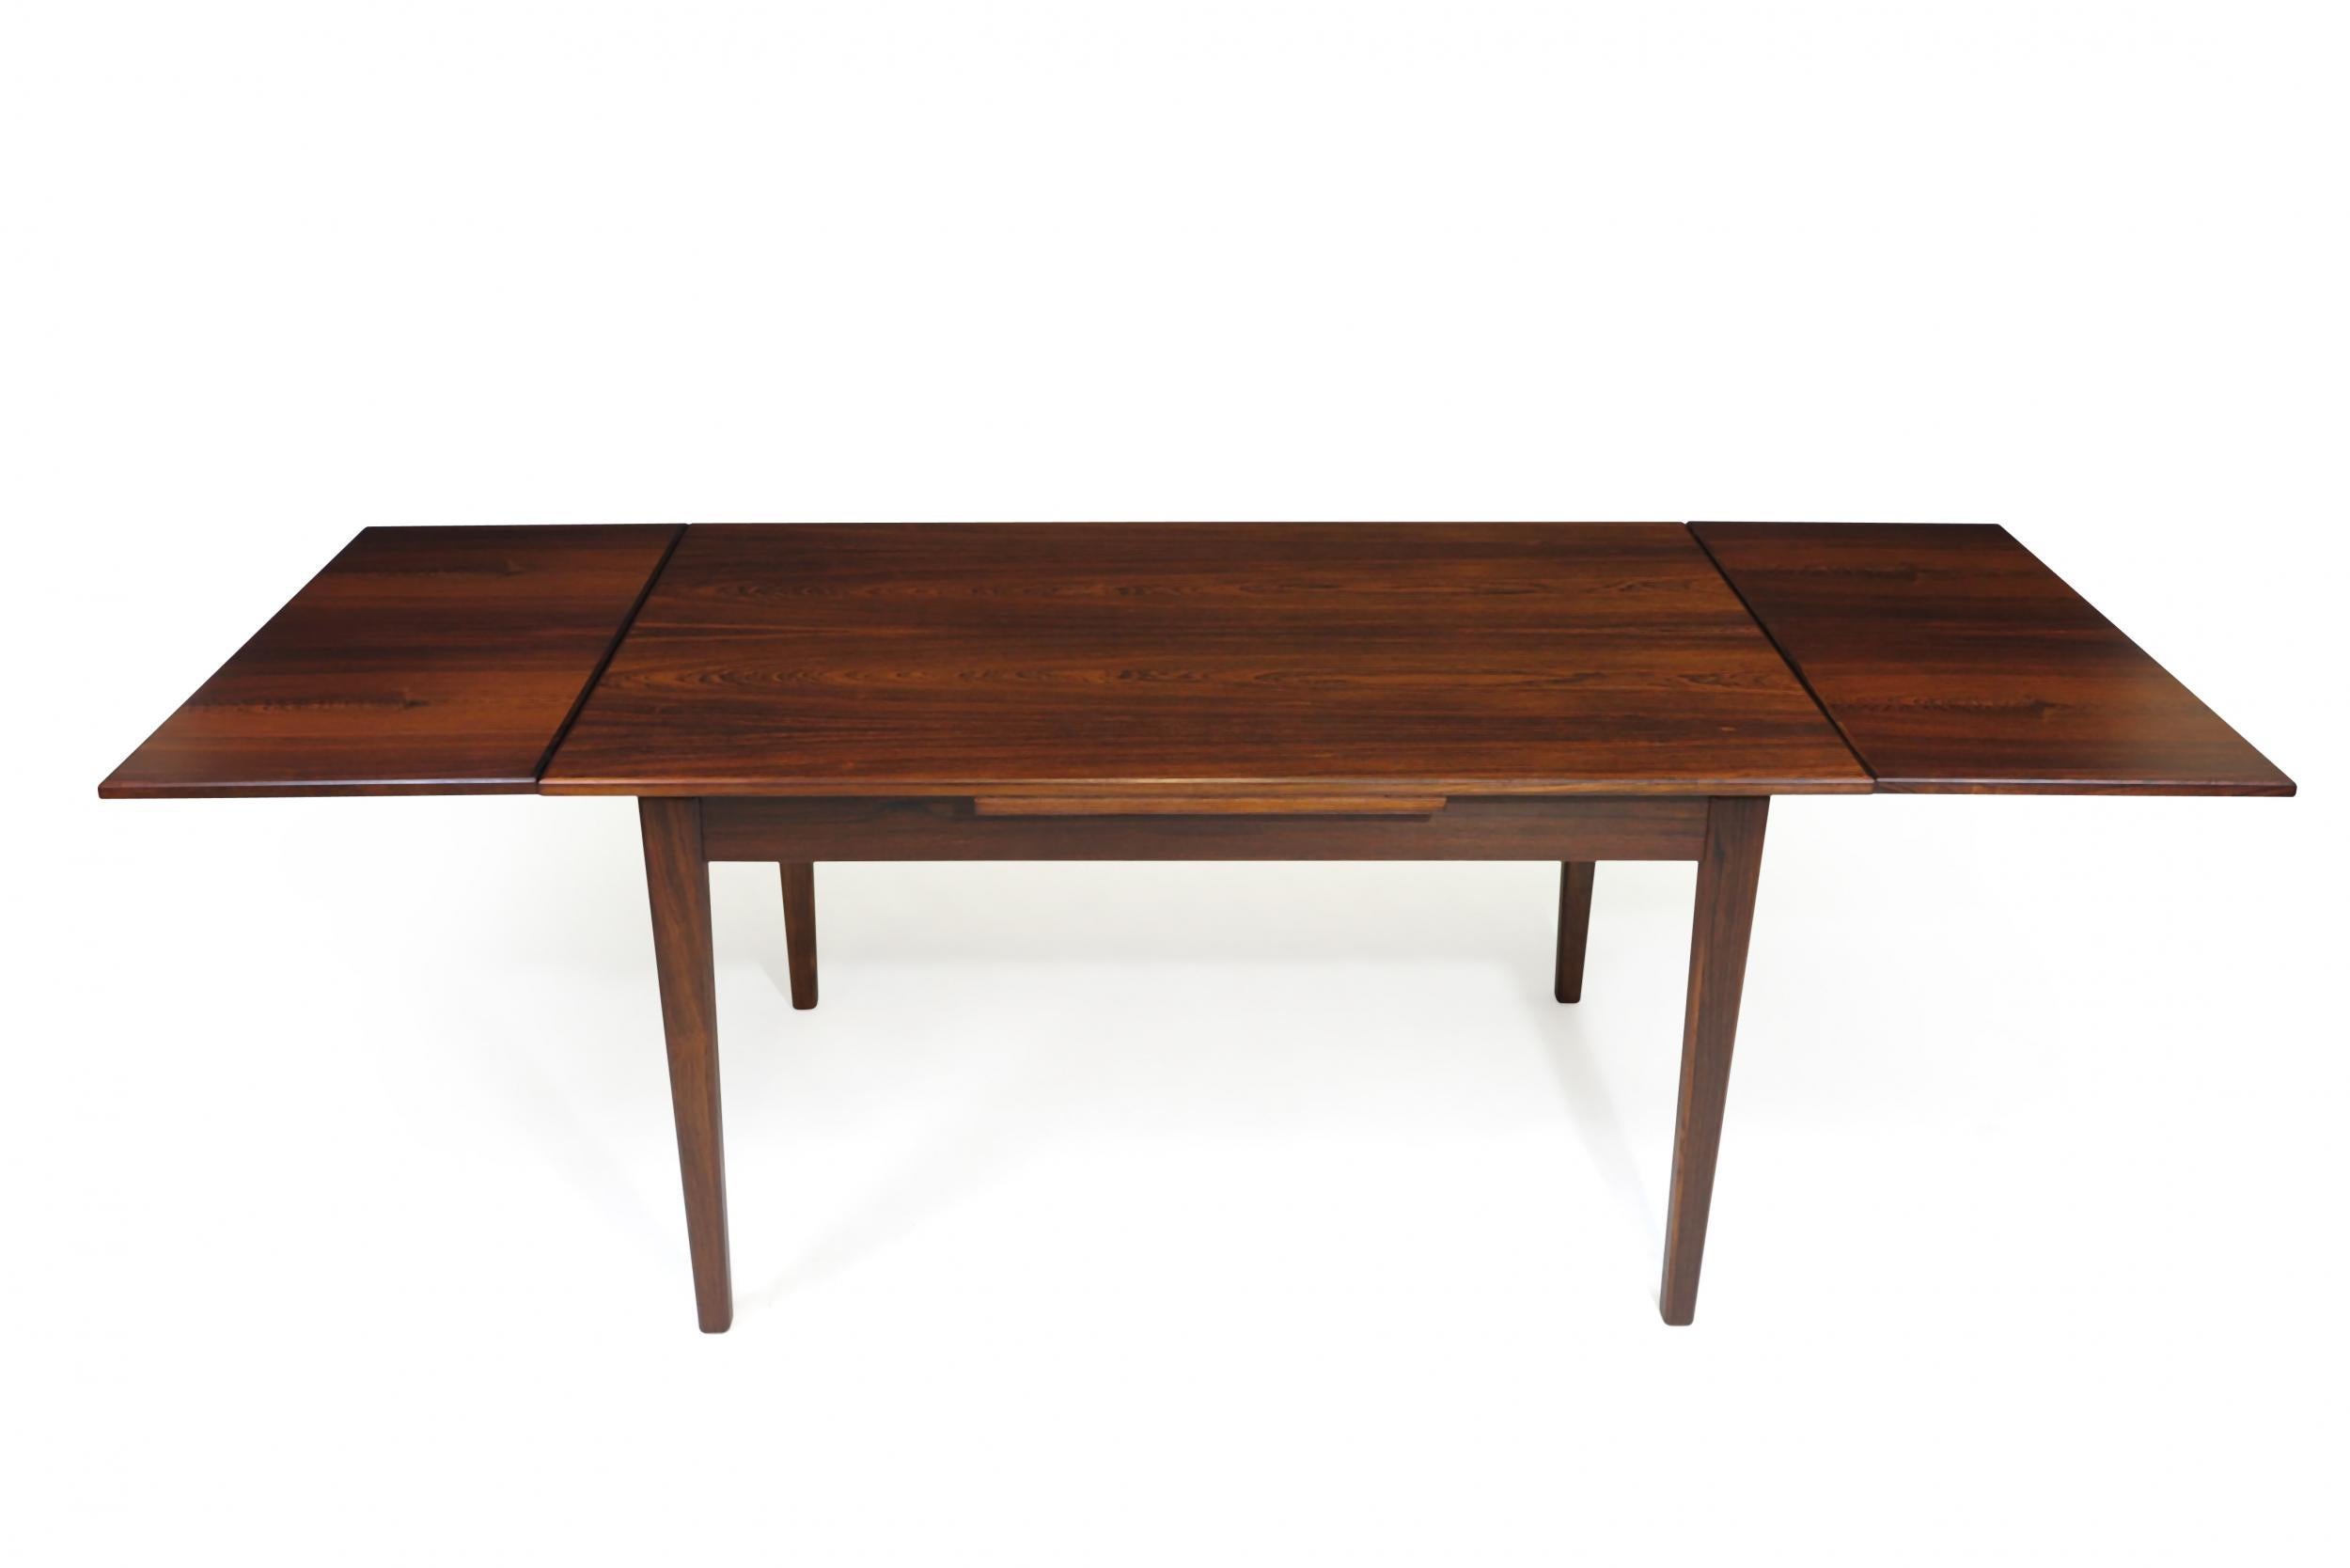 Early 20th Century Danish Rosewood Dining Table with Draw-Leaves